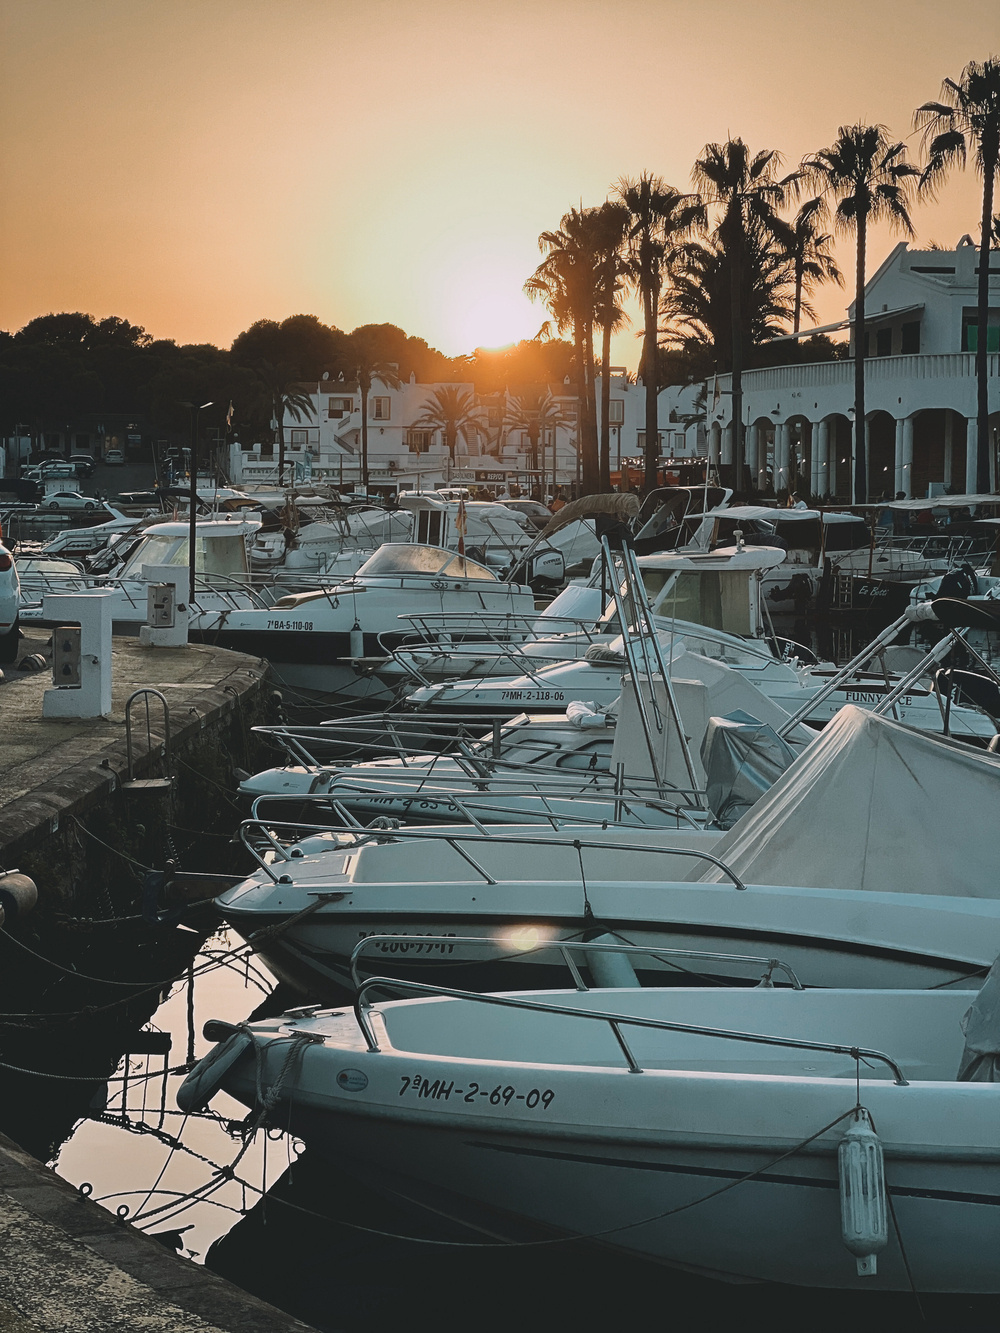 A serene marina at sunset with several moored boats and yachts. Palm trees and white buildings are visible in the background, under a sky transitioning from golden to dark.